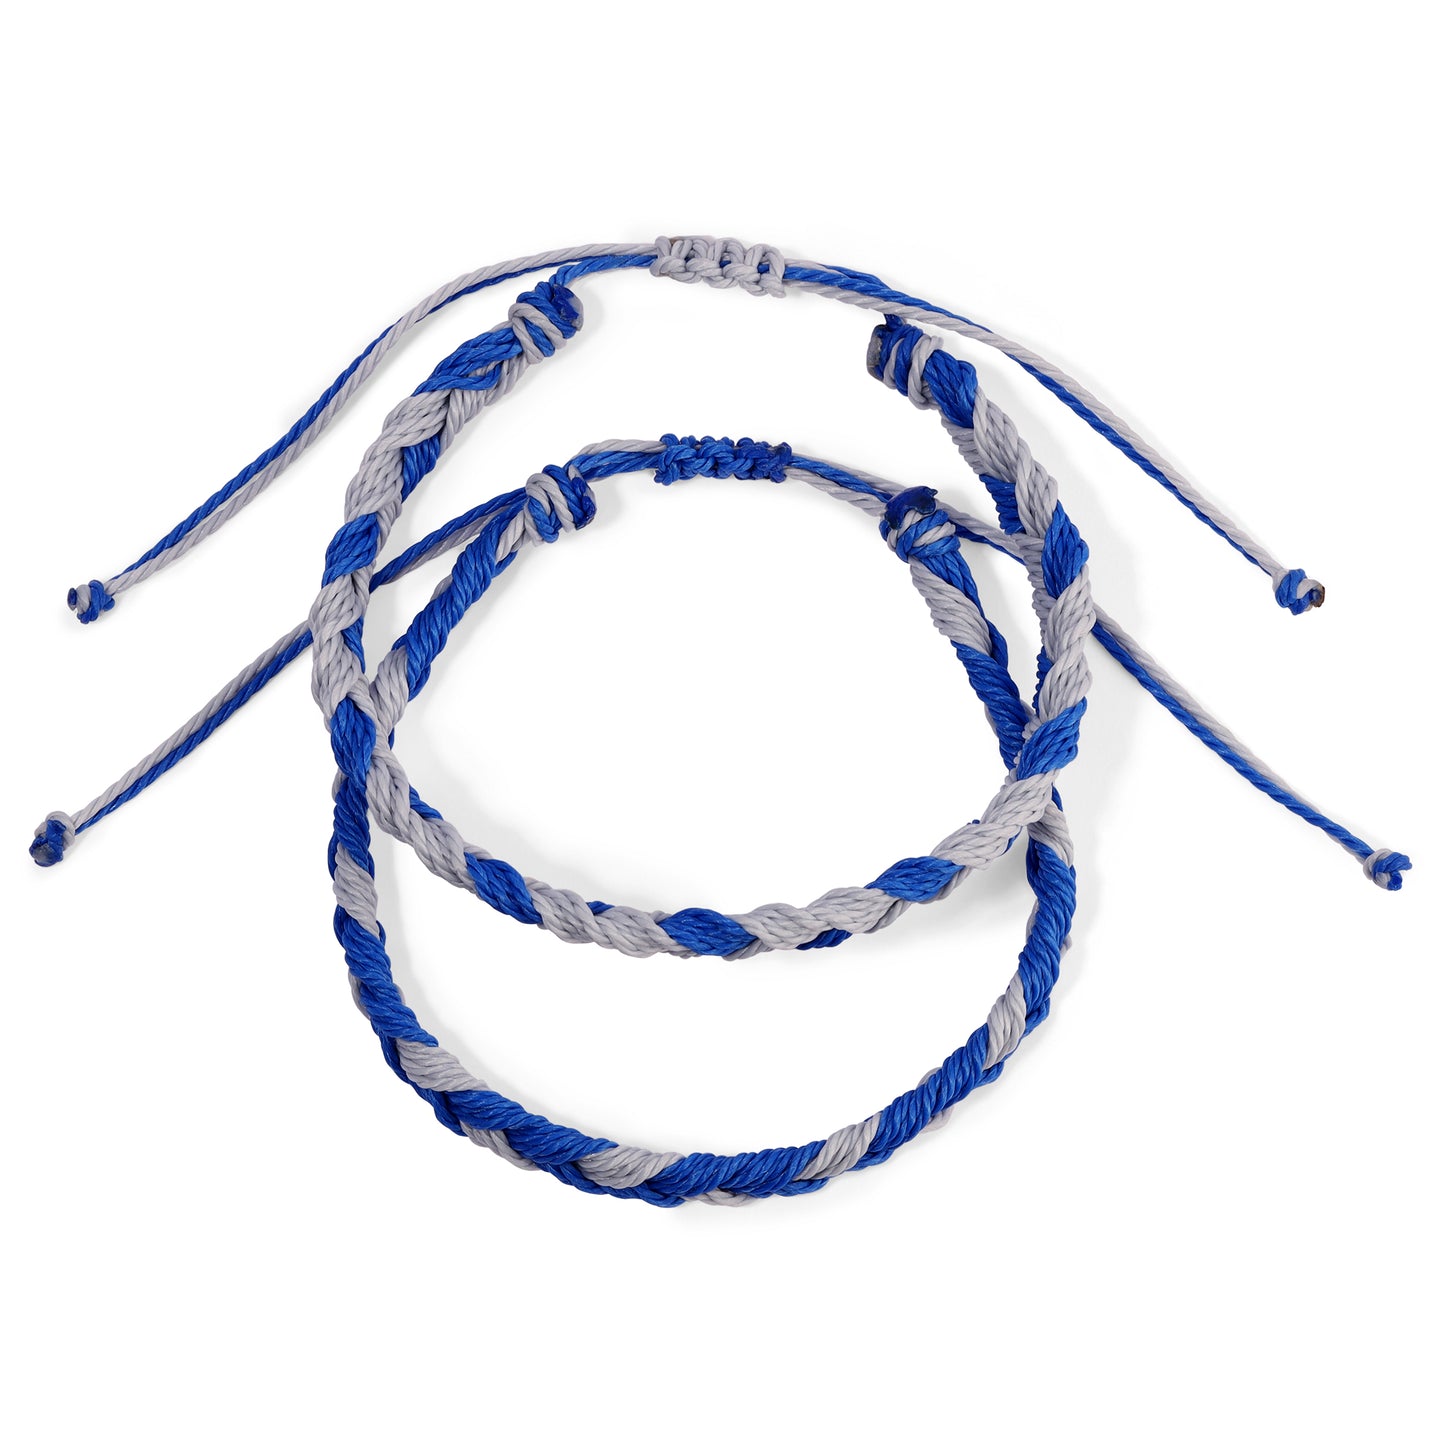 Silver and Blue Team Color Braided Bracelets - Set of 2